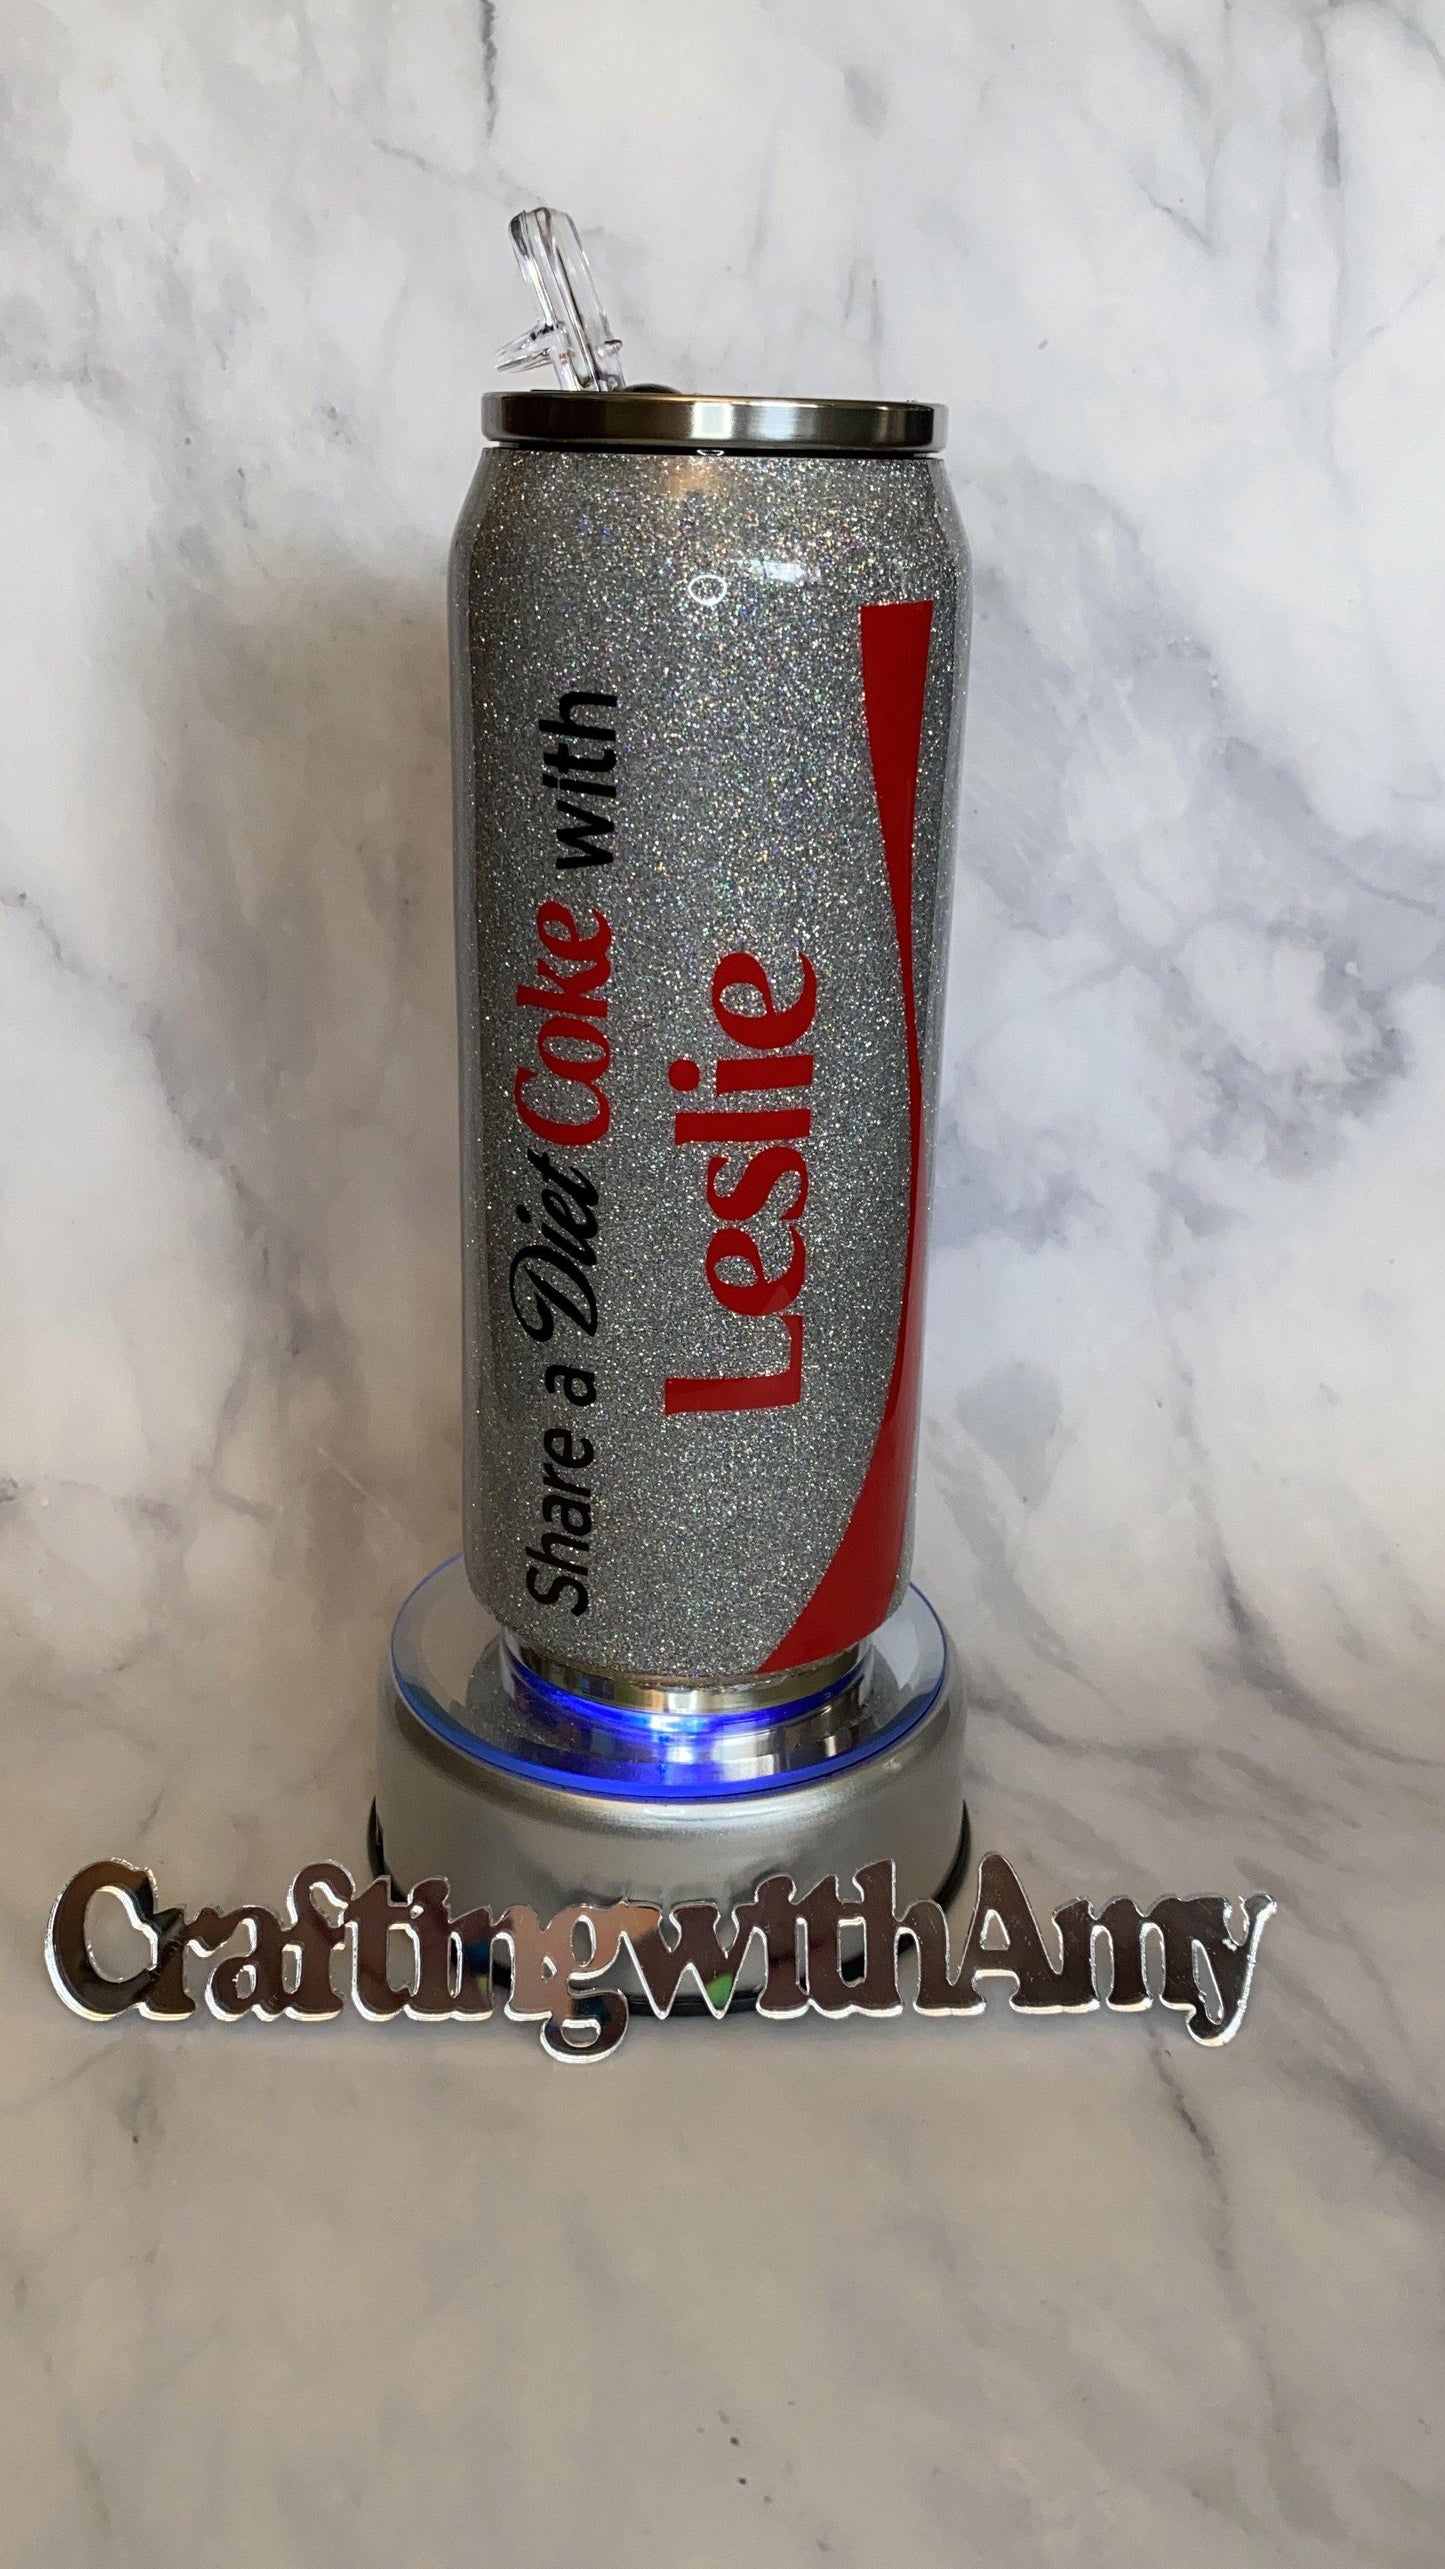 Personalized Diet Coke tumbler, Diet Coke, Diet Coke Epoxy Can Tumbler, Custom coke, have a coke with, inspired, diet coke inspired freeshipping - CraftingwithAmy